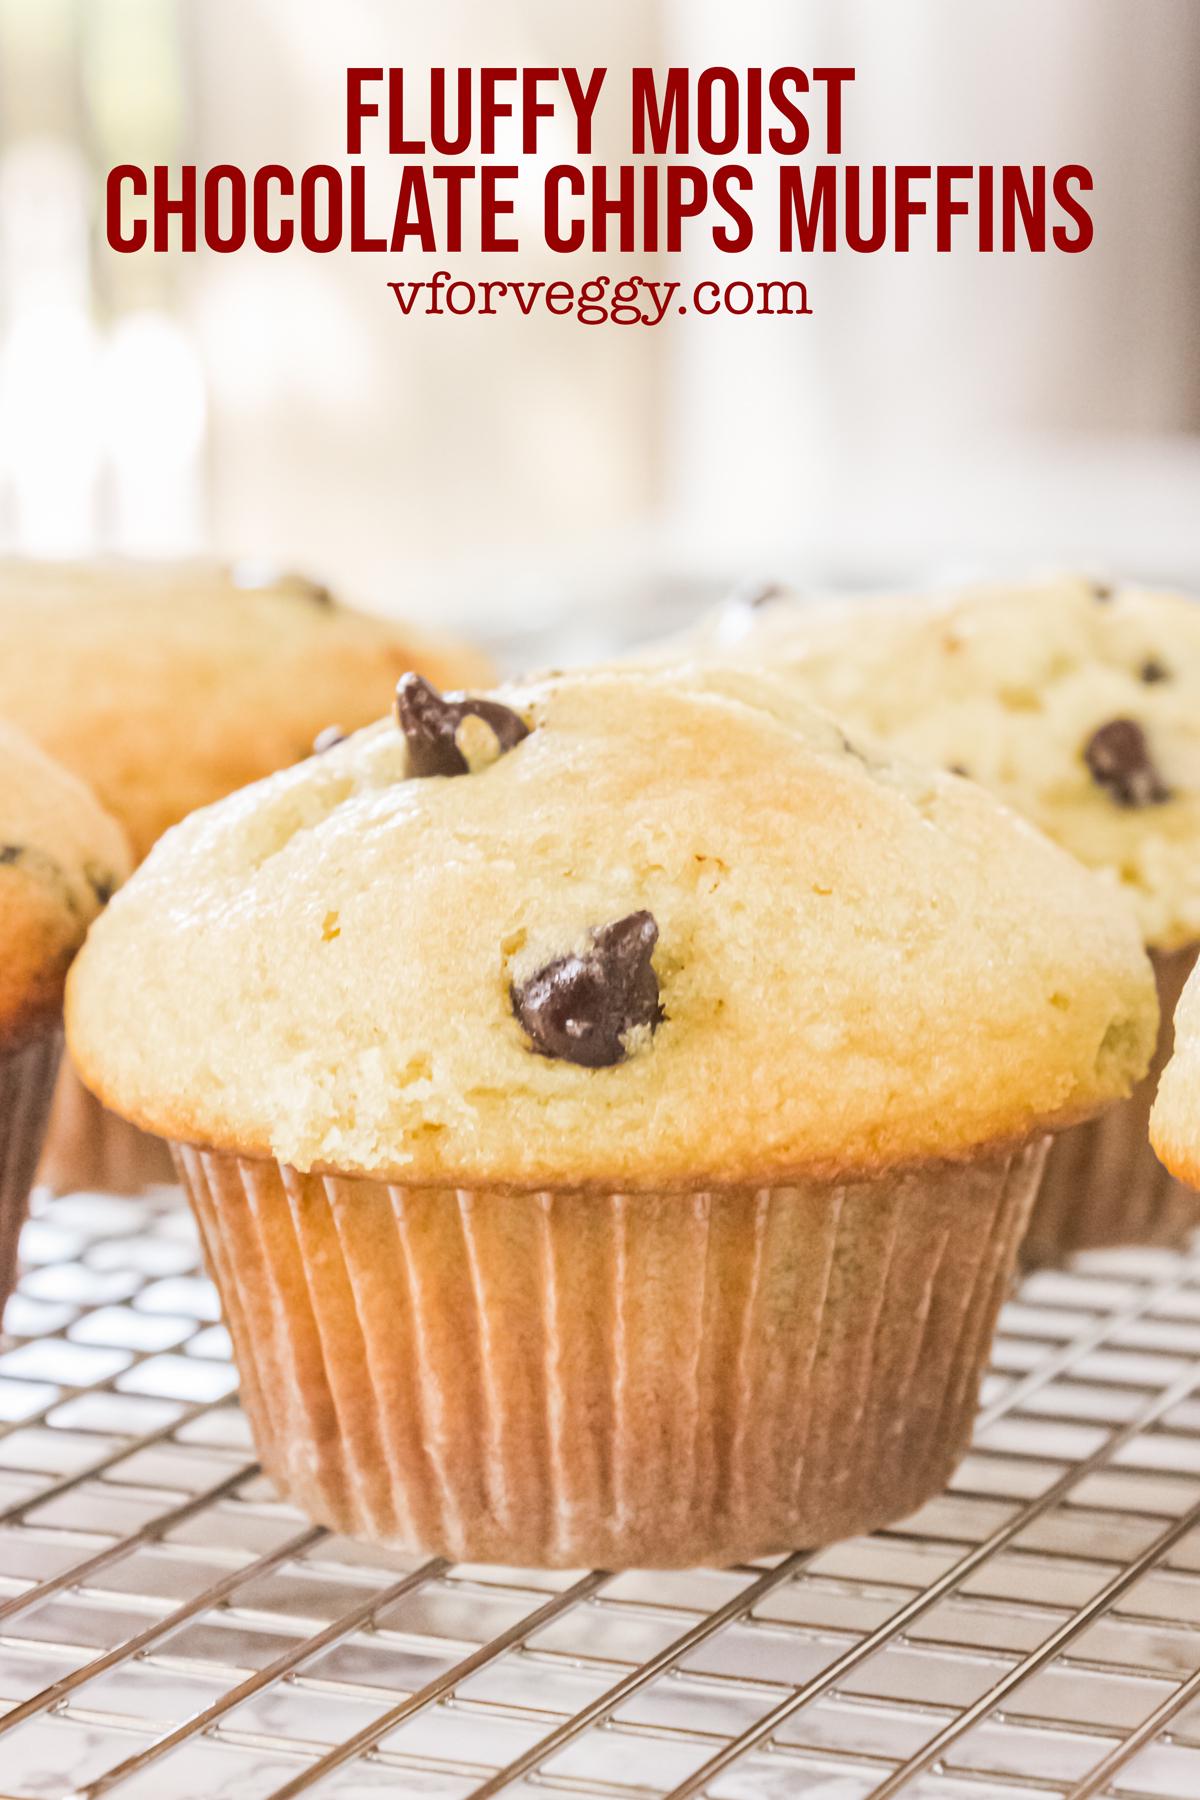 Fluffy Moist Chocolate Chips Muffins